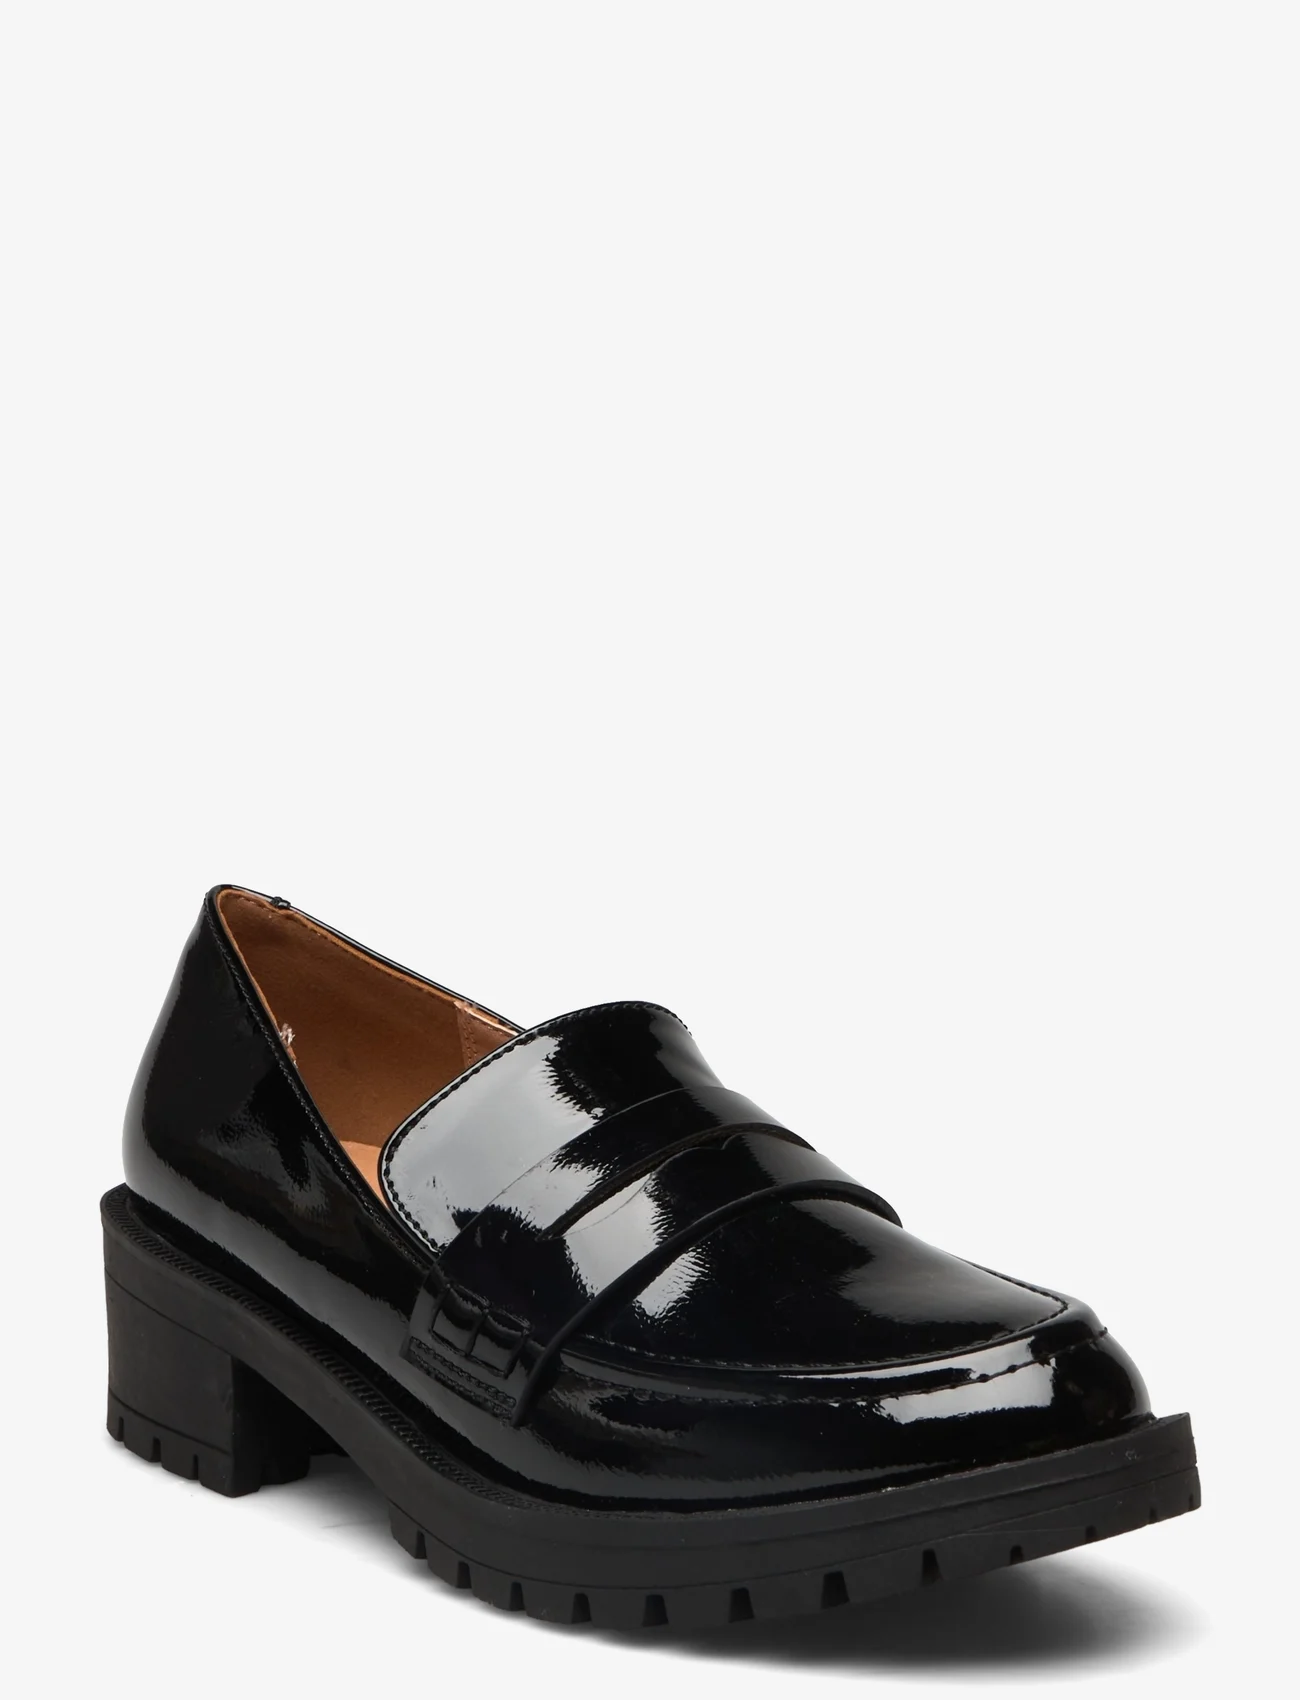 Bianco - BIAPEARL Simple Penny Loafer Patent Aquarius - black - 0